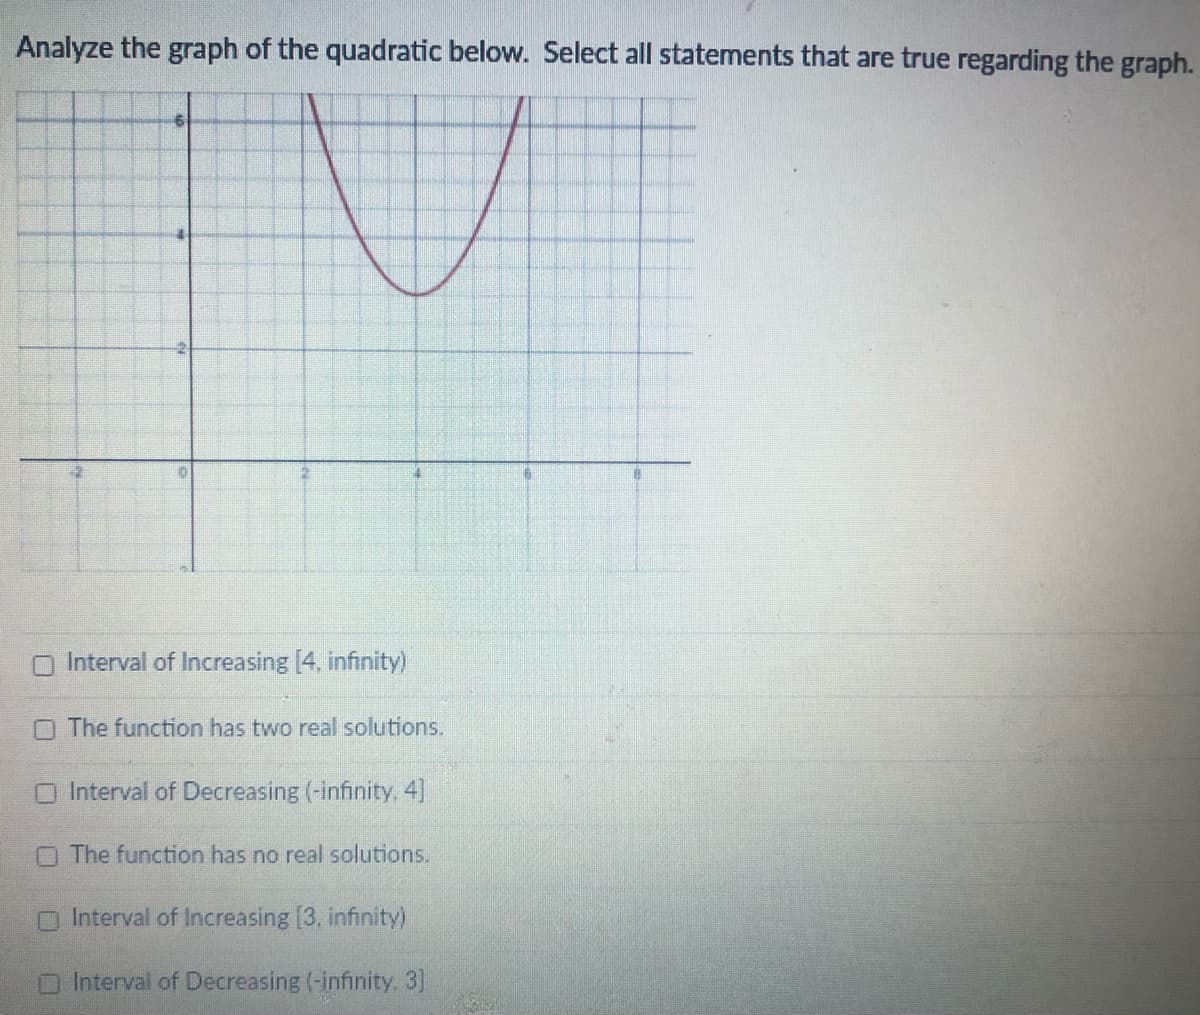 Analyze the graph of the quadratic below. Select all statements that are true regarding the graph.
O Interval of Increasing [4, infinity)
O The function has two real solutions.
O Interval of Decreasing (-infinity 4]
O The function has no real solutions.
Interval of Increasing [3, infinity)
Interval of Decreasing (-infinity. 3]
